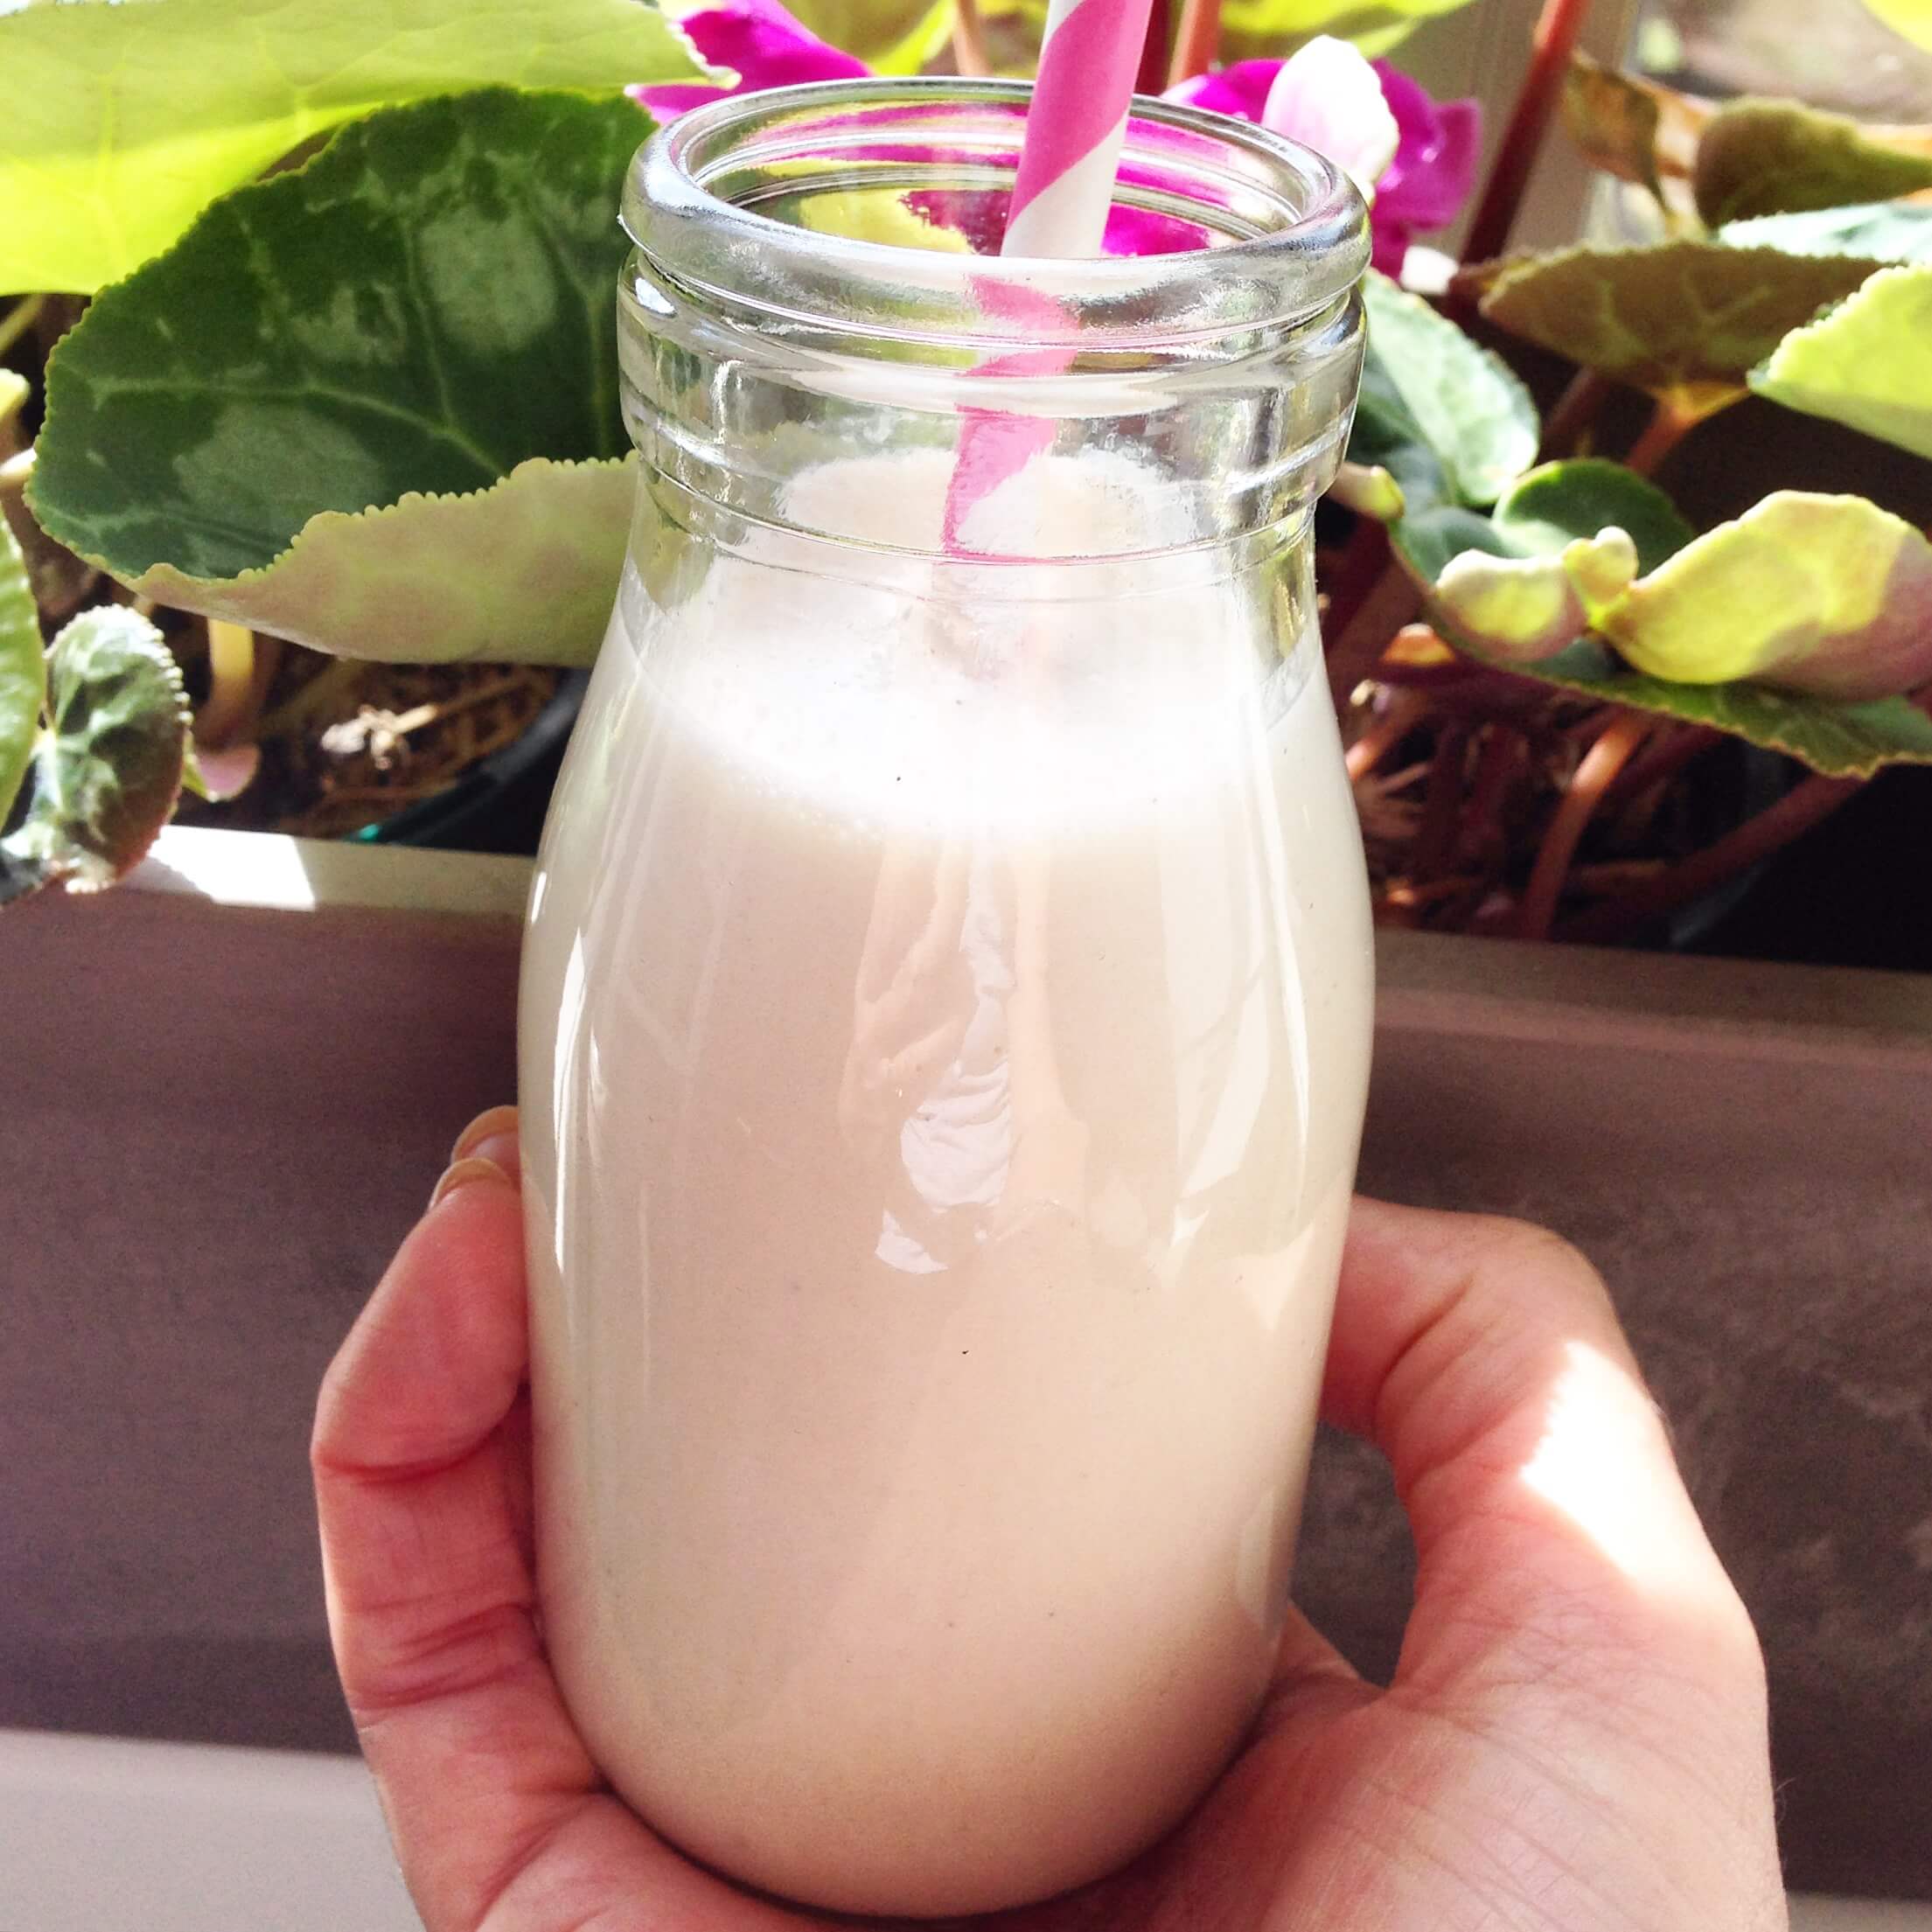 Try this simple banana protein shake after your next workout